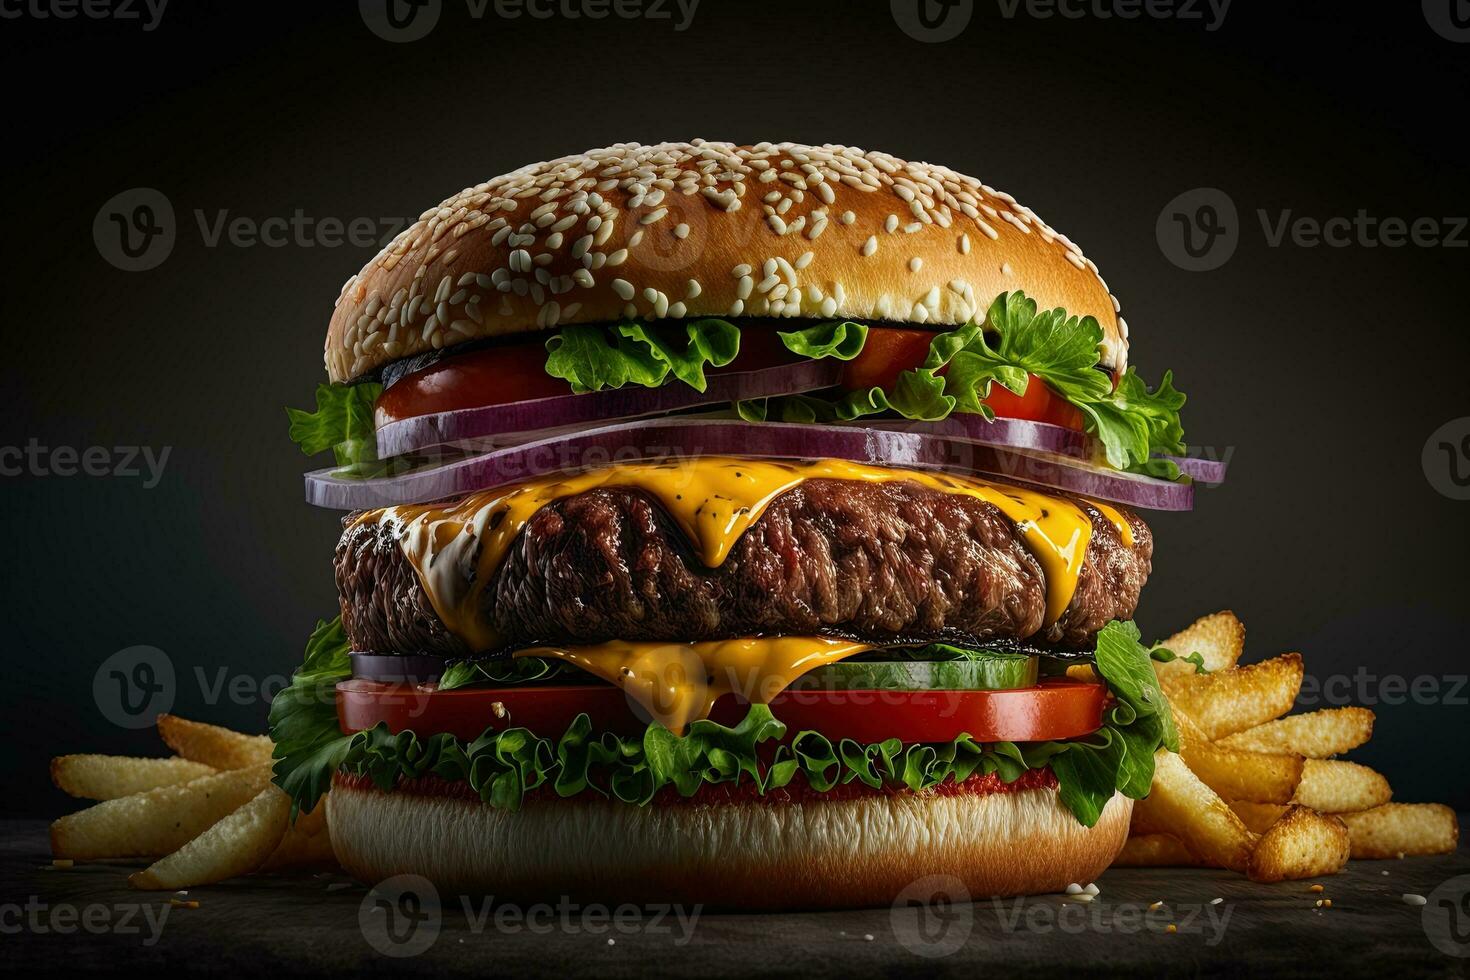 Close-up of a juicy burger with fries, it look very delicious. Big sandwich - hamburger with juicy beef burger, cheese, tomato, and red onion. photo